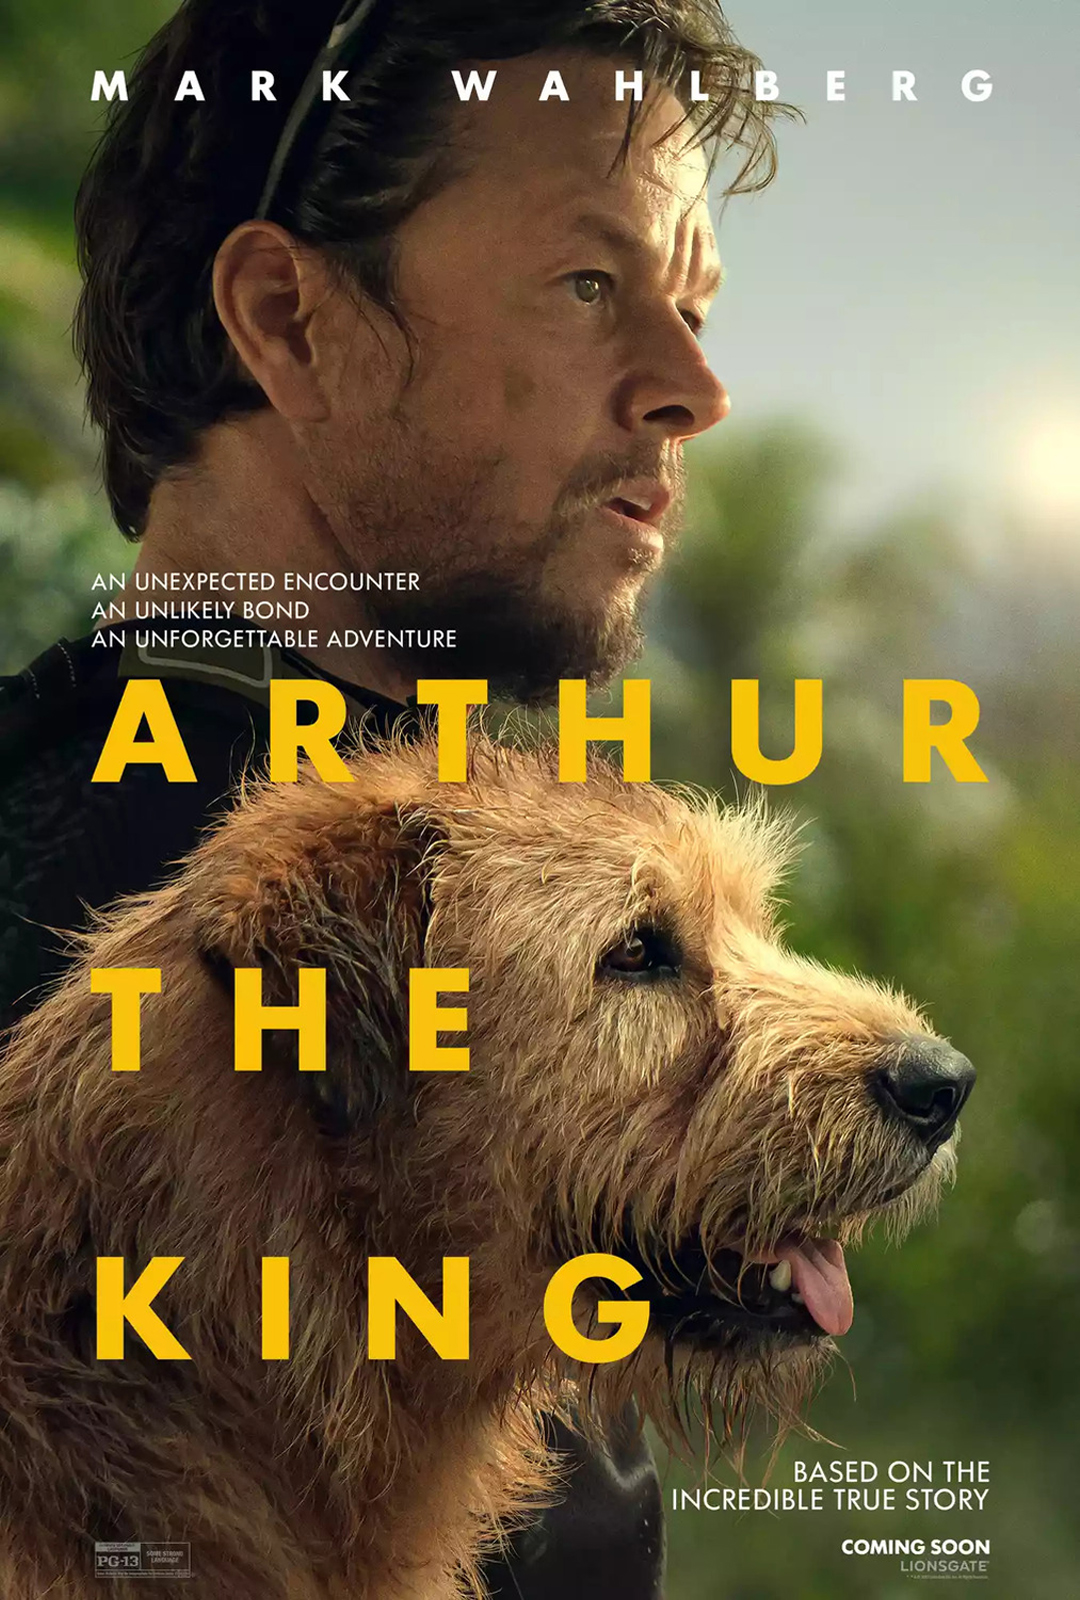 Movie Poster: Arthur the King